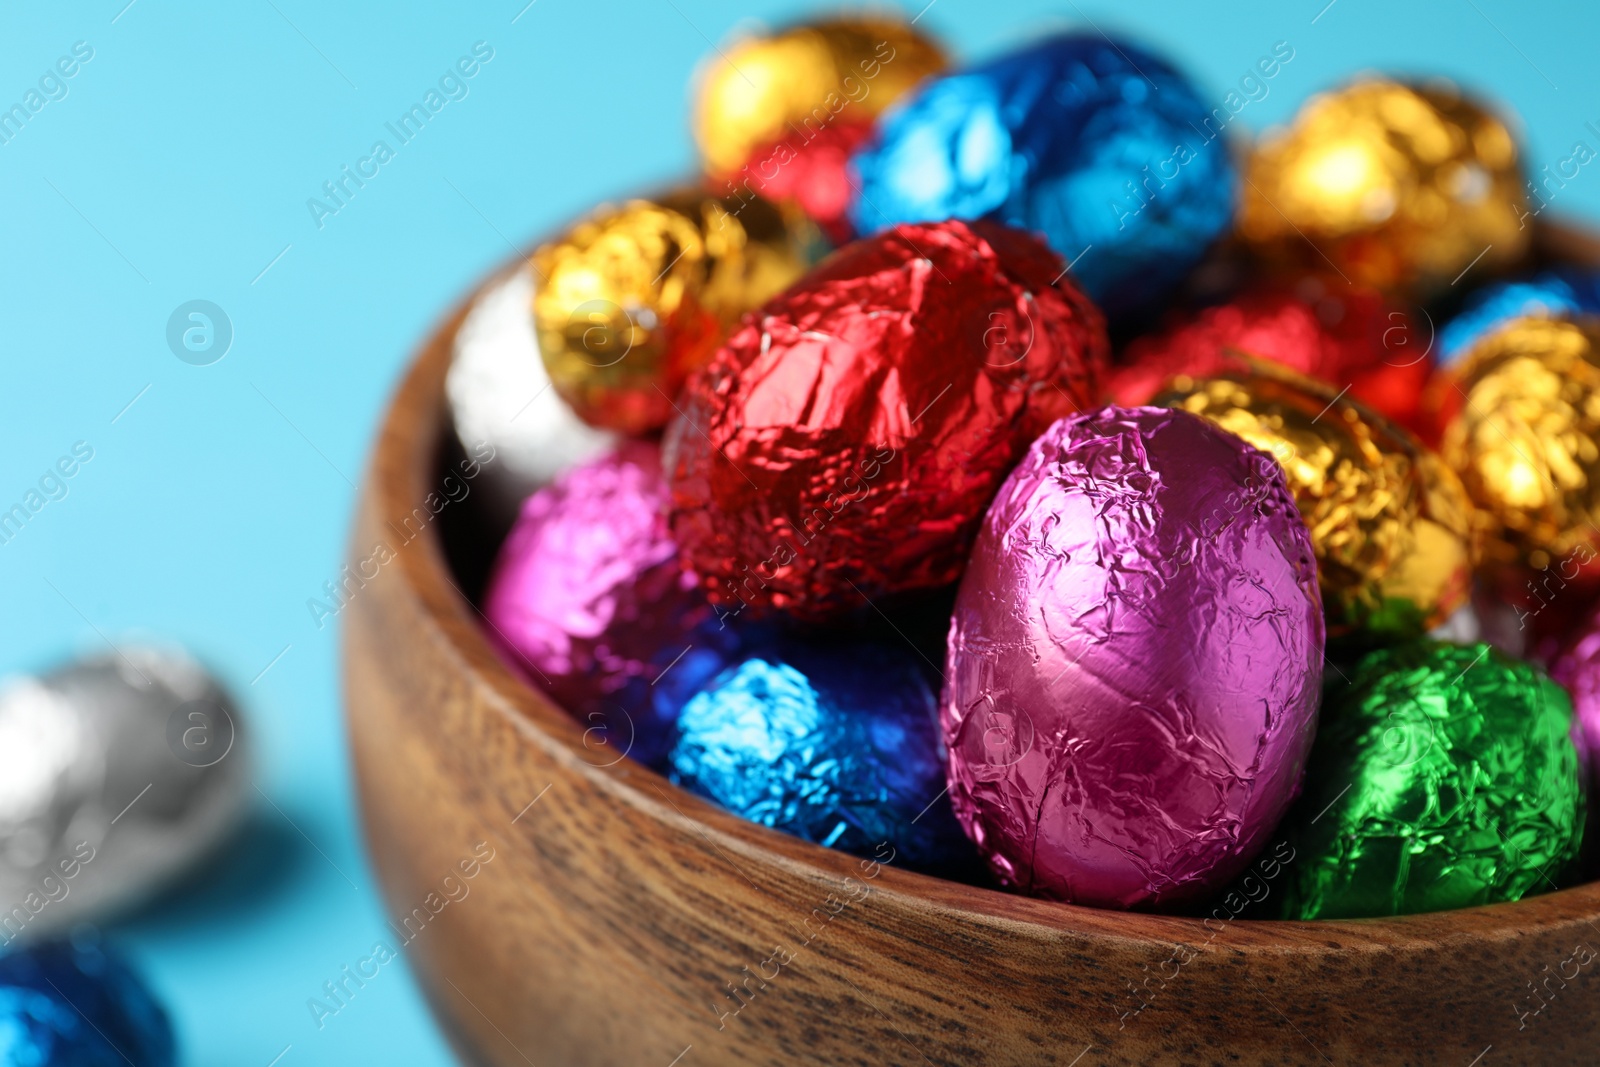 Photo of Wooden bowl with chocolate eggs wrapped in colorful foil on light blue background, closeup